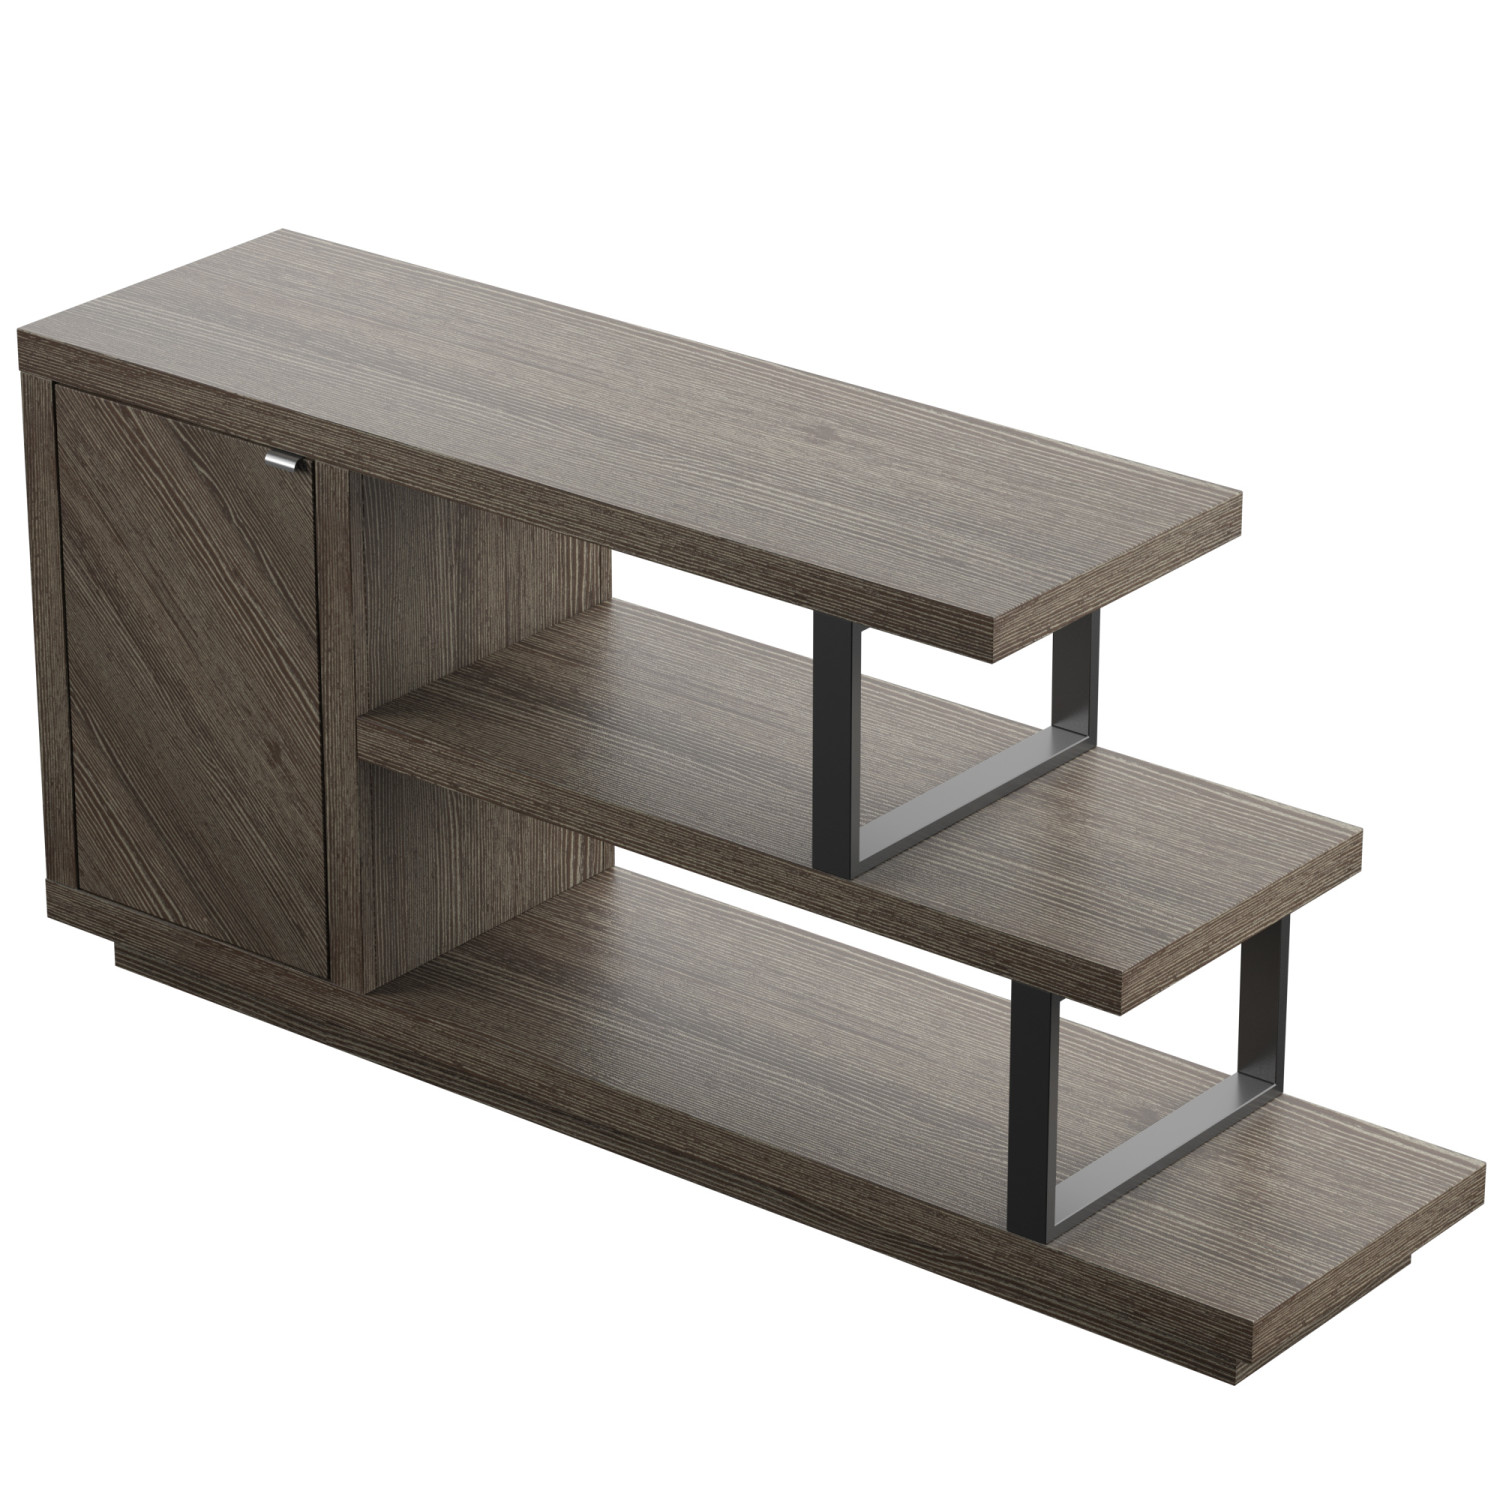 TV Stand for TVs up to 55” with Asymmetrical Shelves in Curtis Oak - image 5 of 14